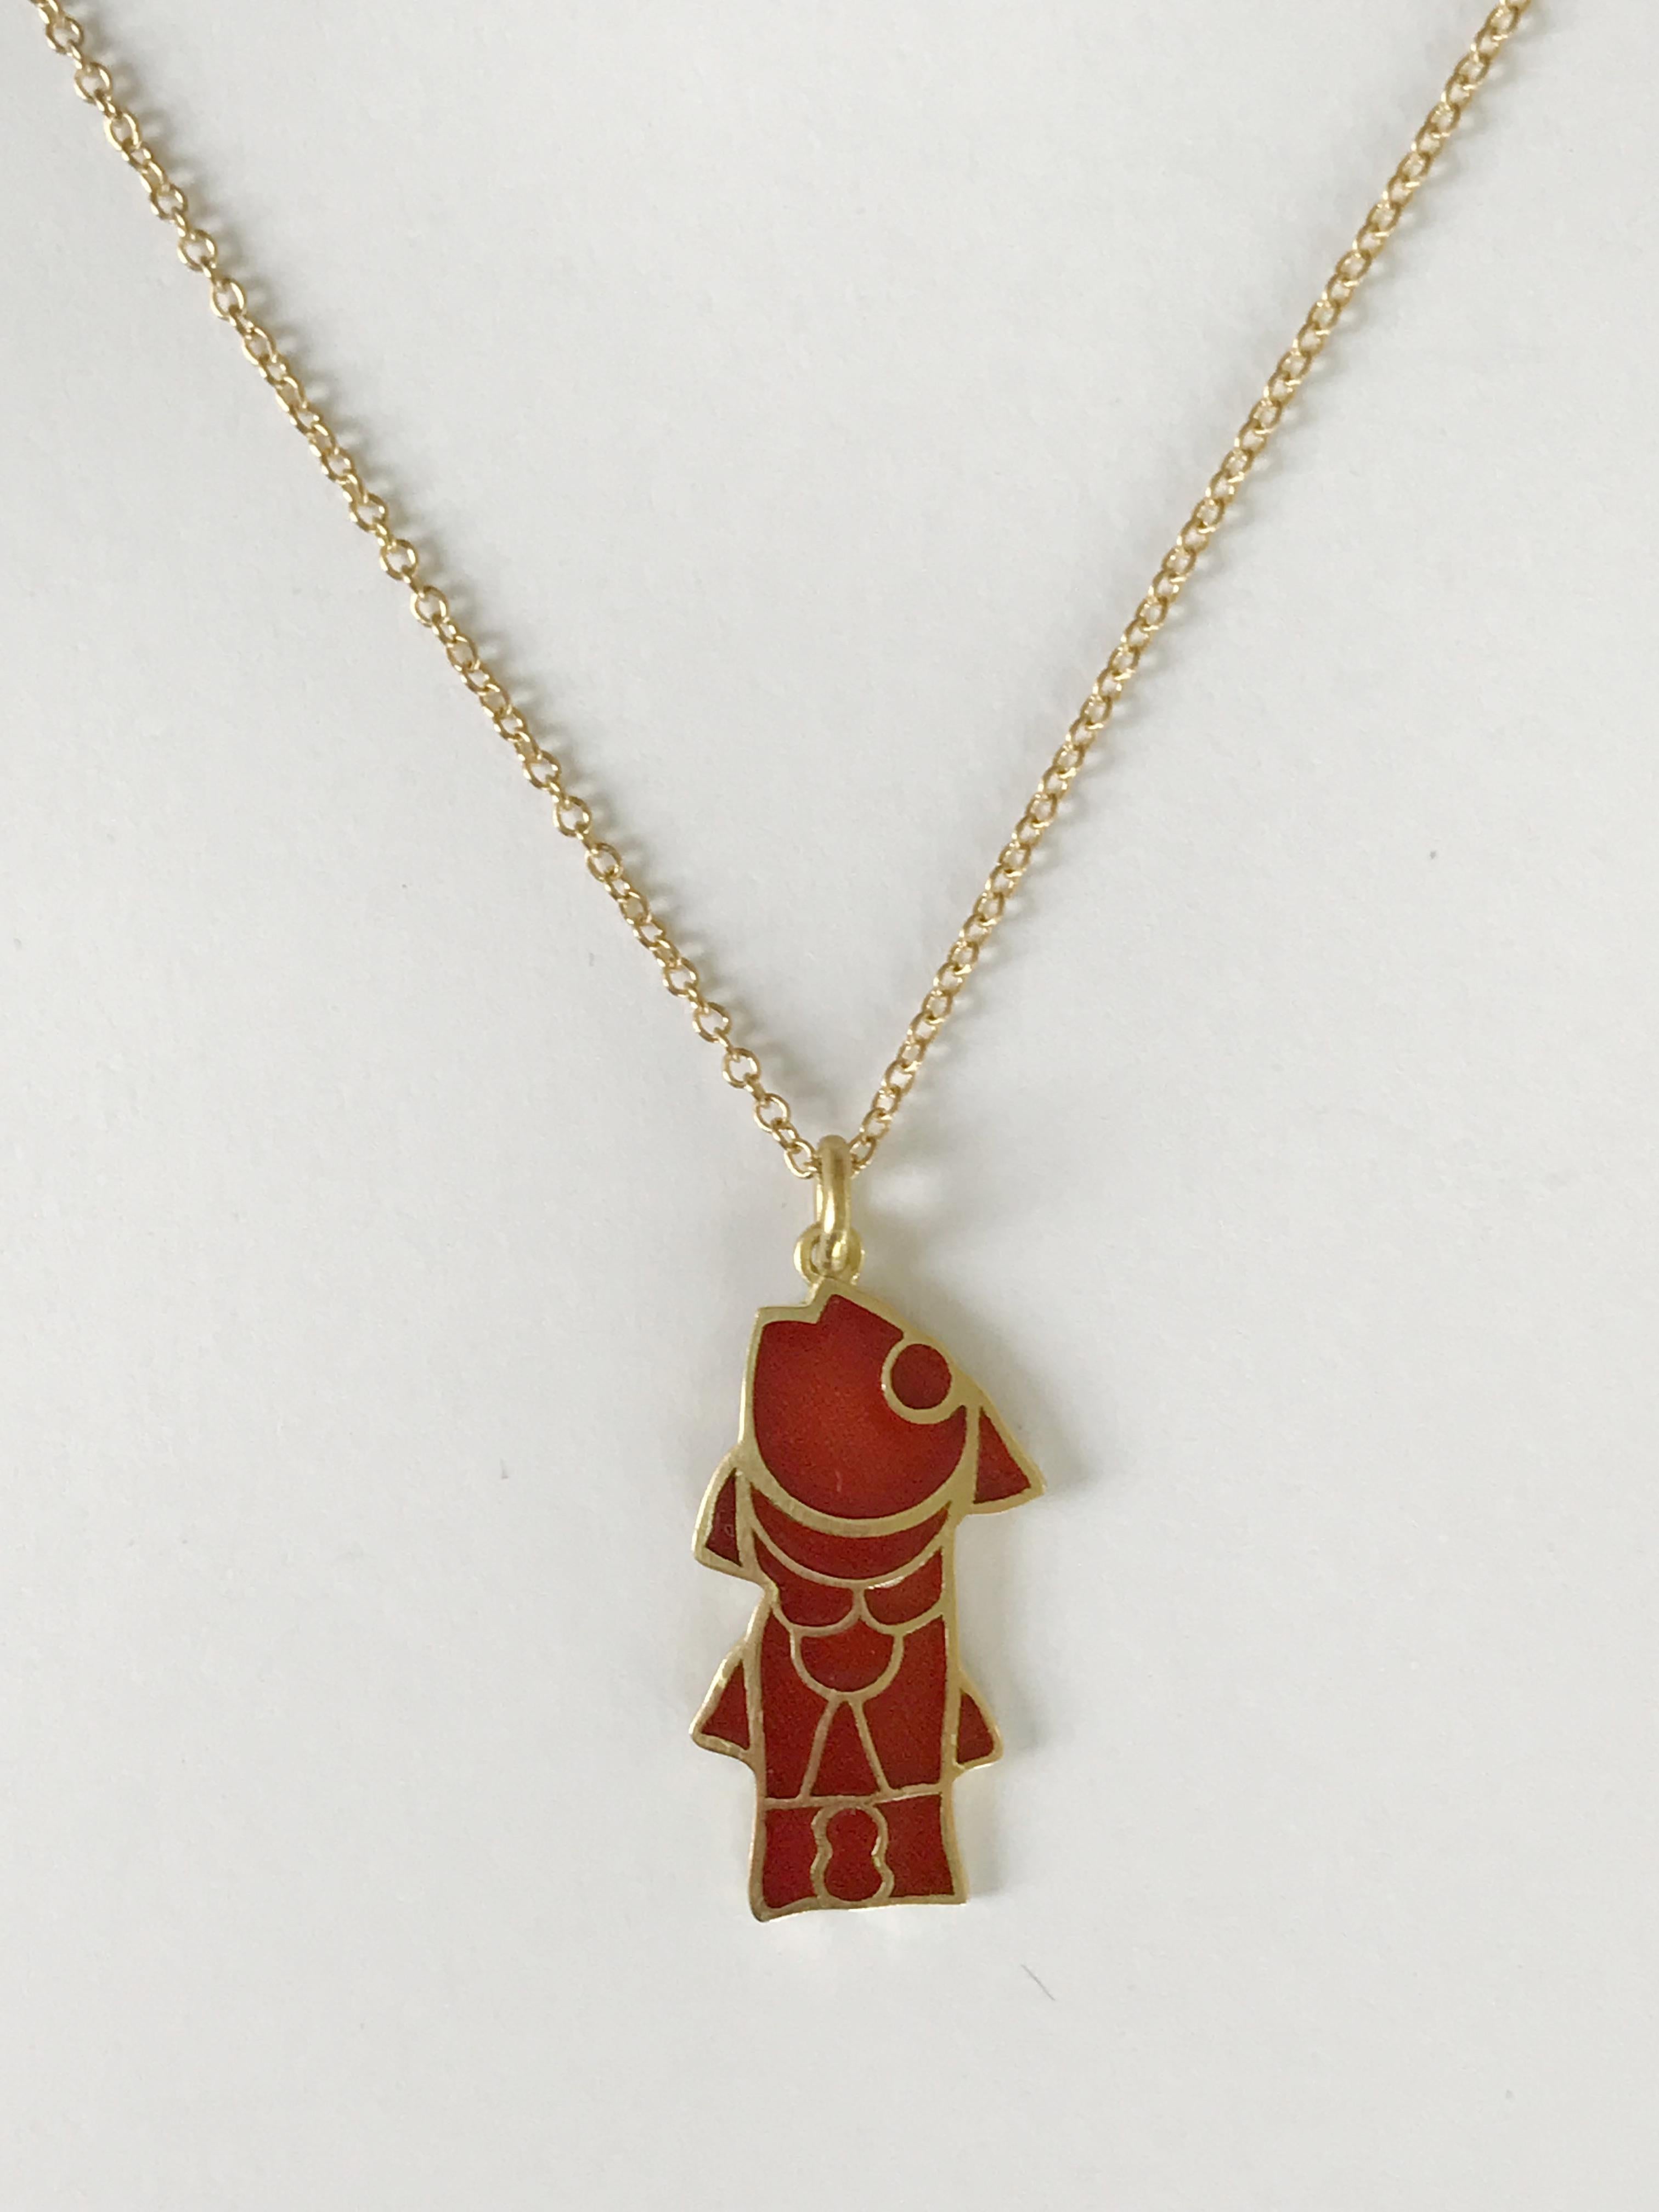 Dalben design fish shape red fire enamel and 18 k yellow gold necklace inspired by Longobard jewelry.
Fish dimensions :
height 29,3 mm
width 14,6 mm
Chain length 58 cm
The pendant has been designed and handcrafted in our atelier in Como Italy with a